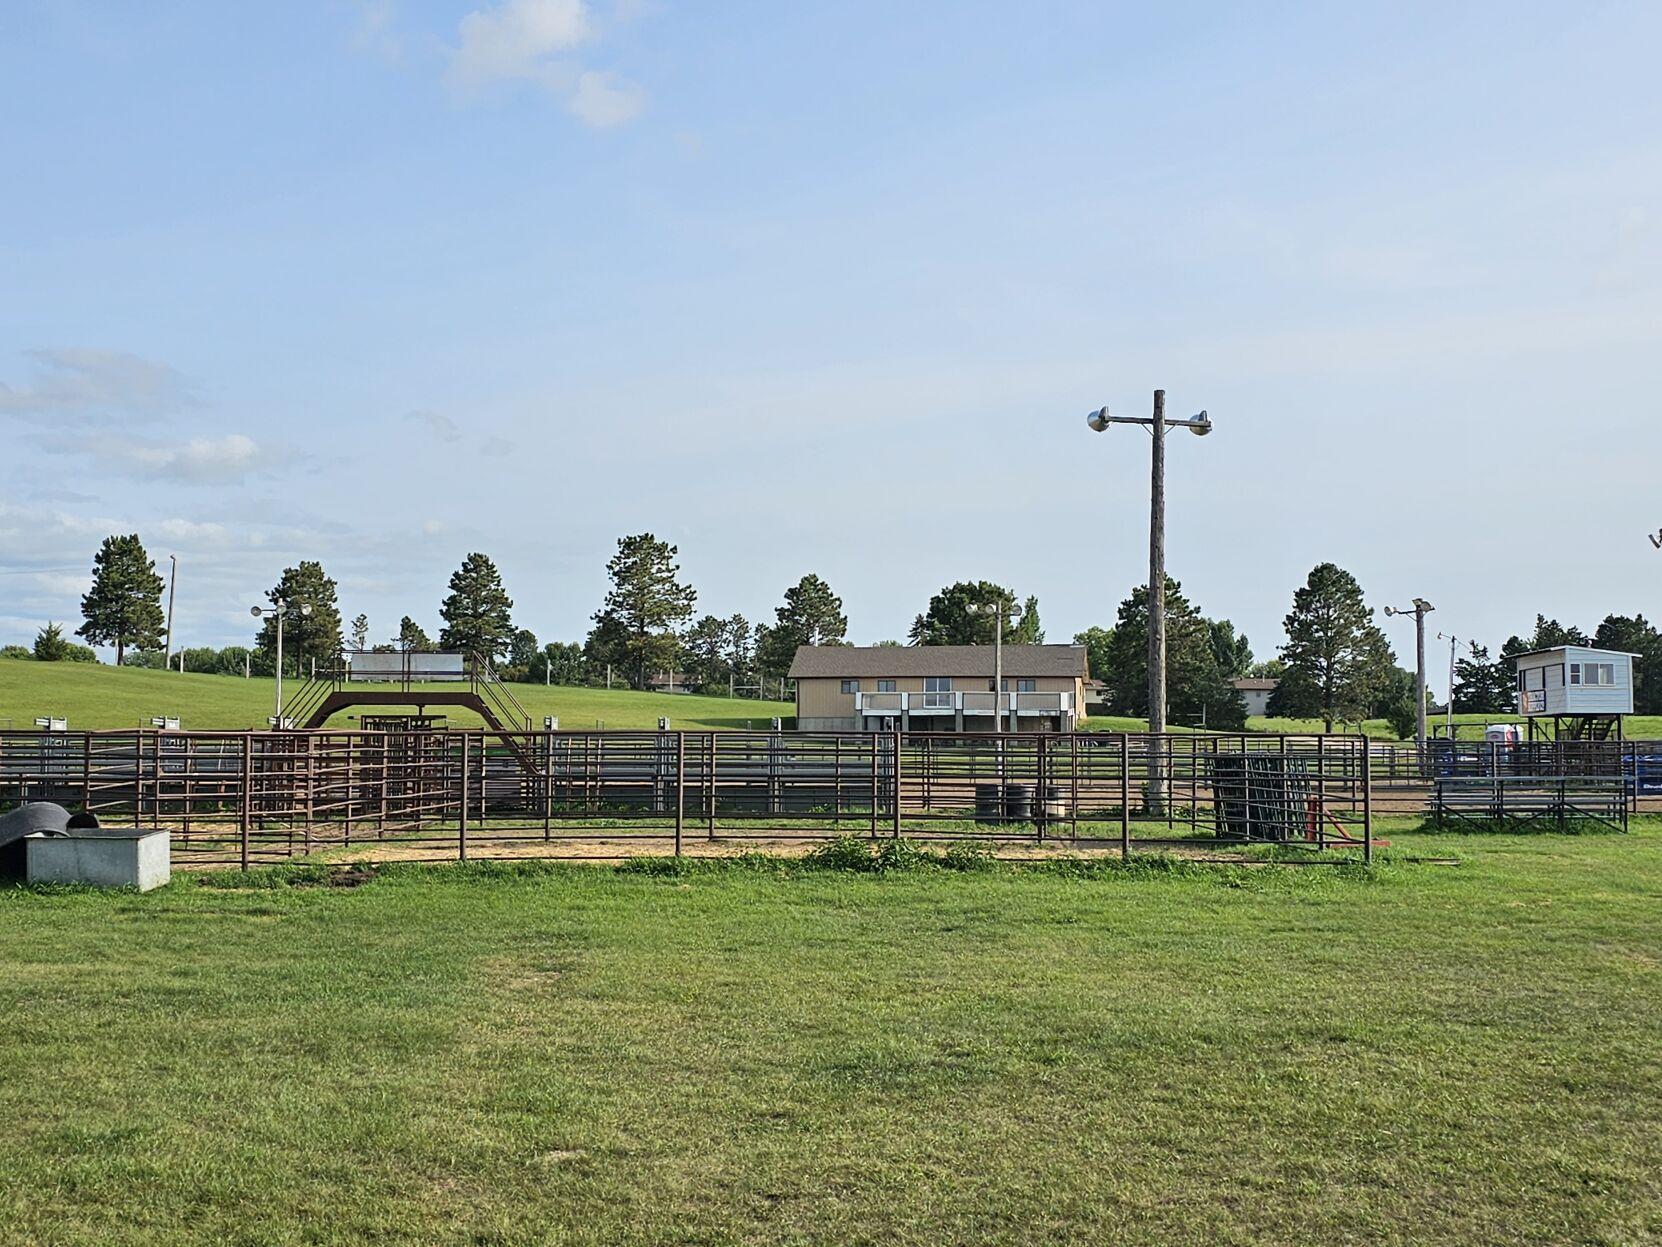 Watertown Rodeo receives needed special license approval Local News